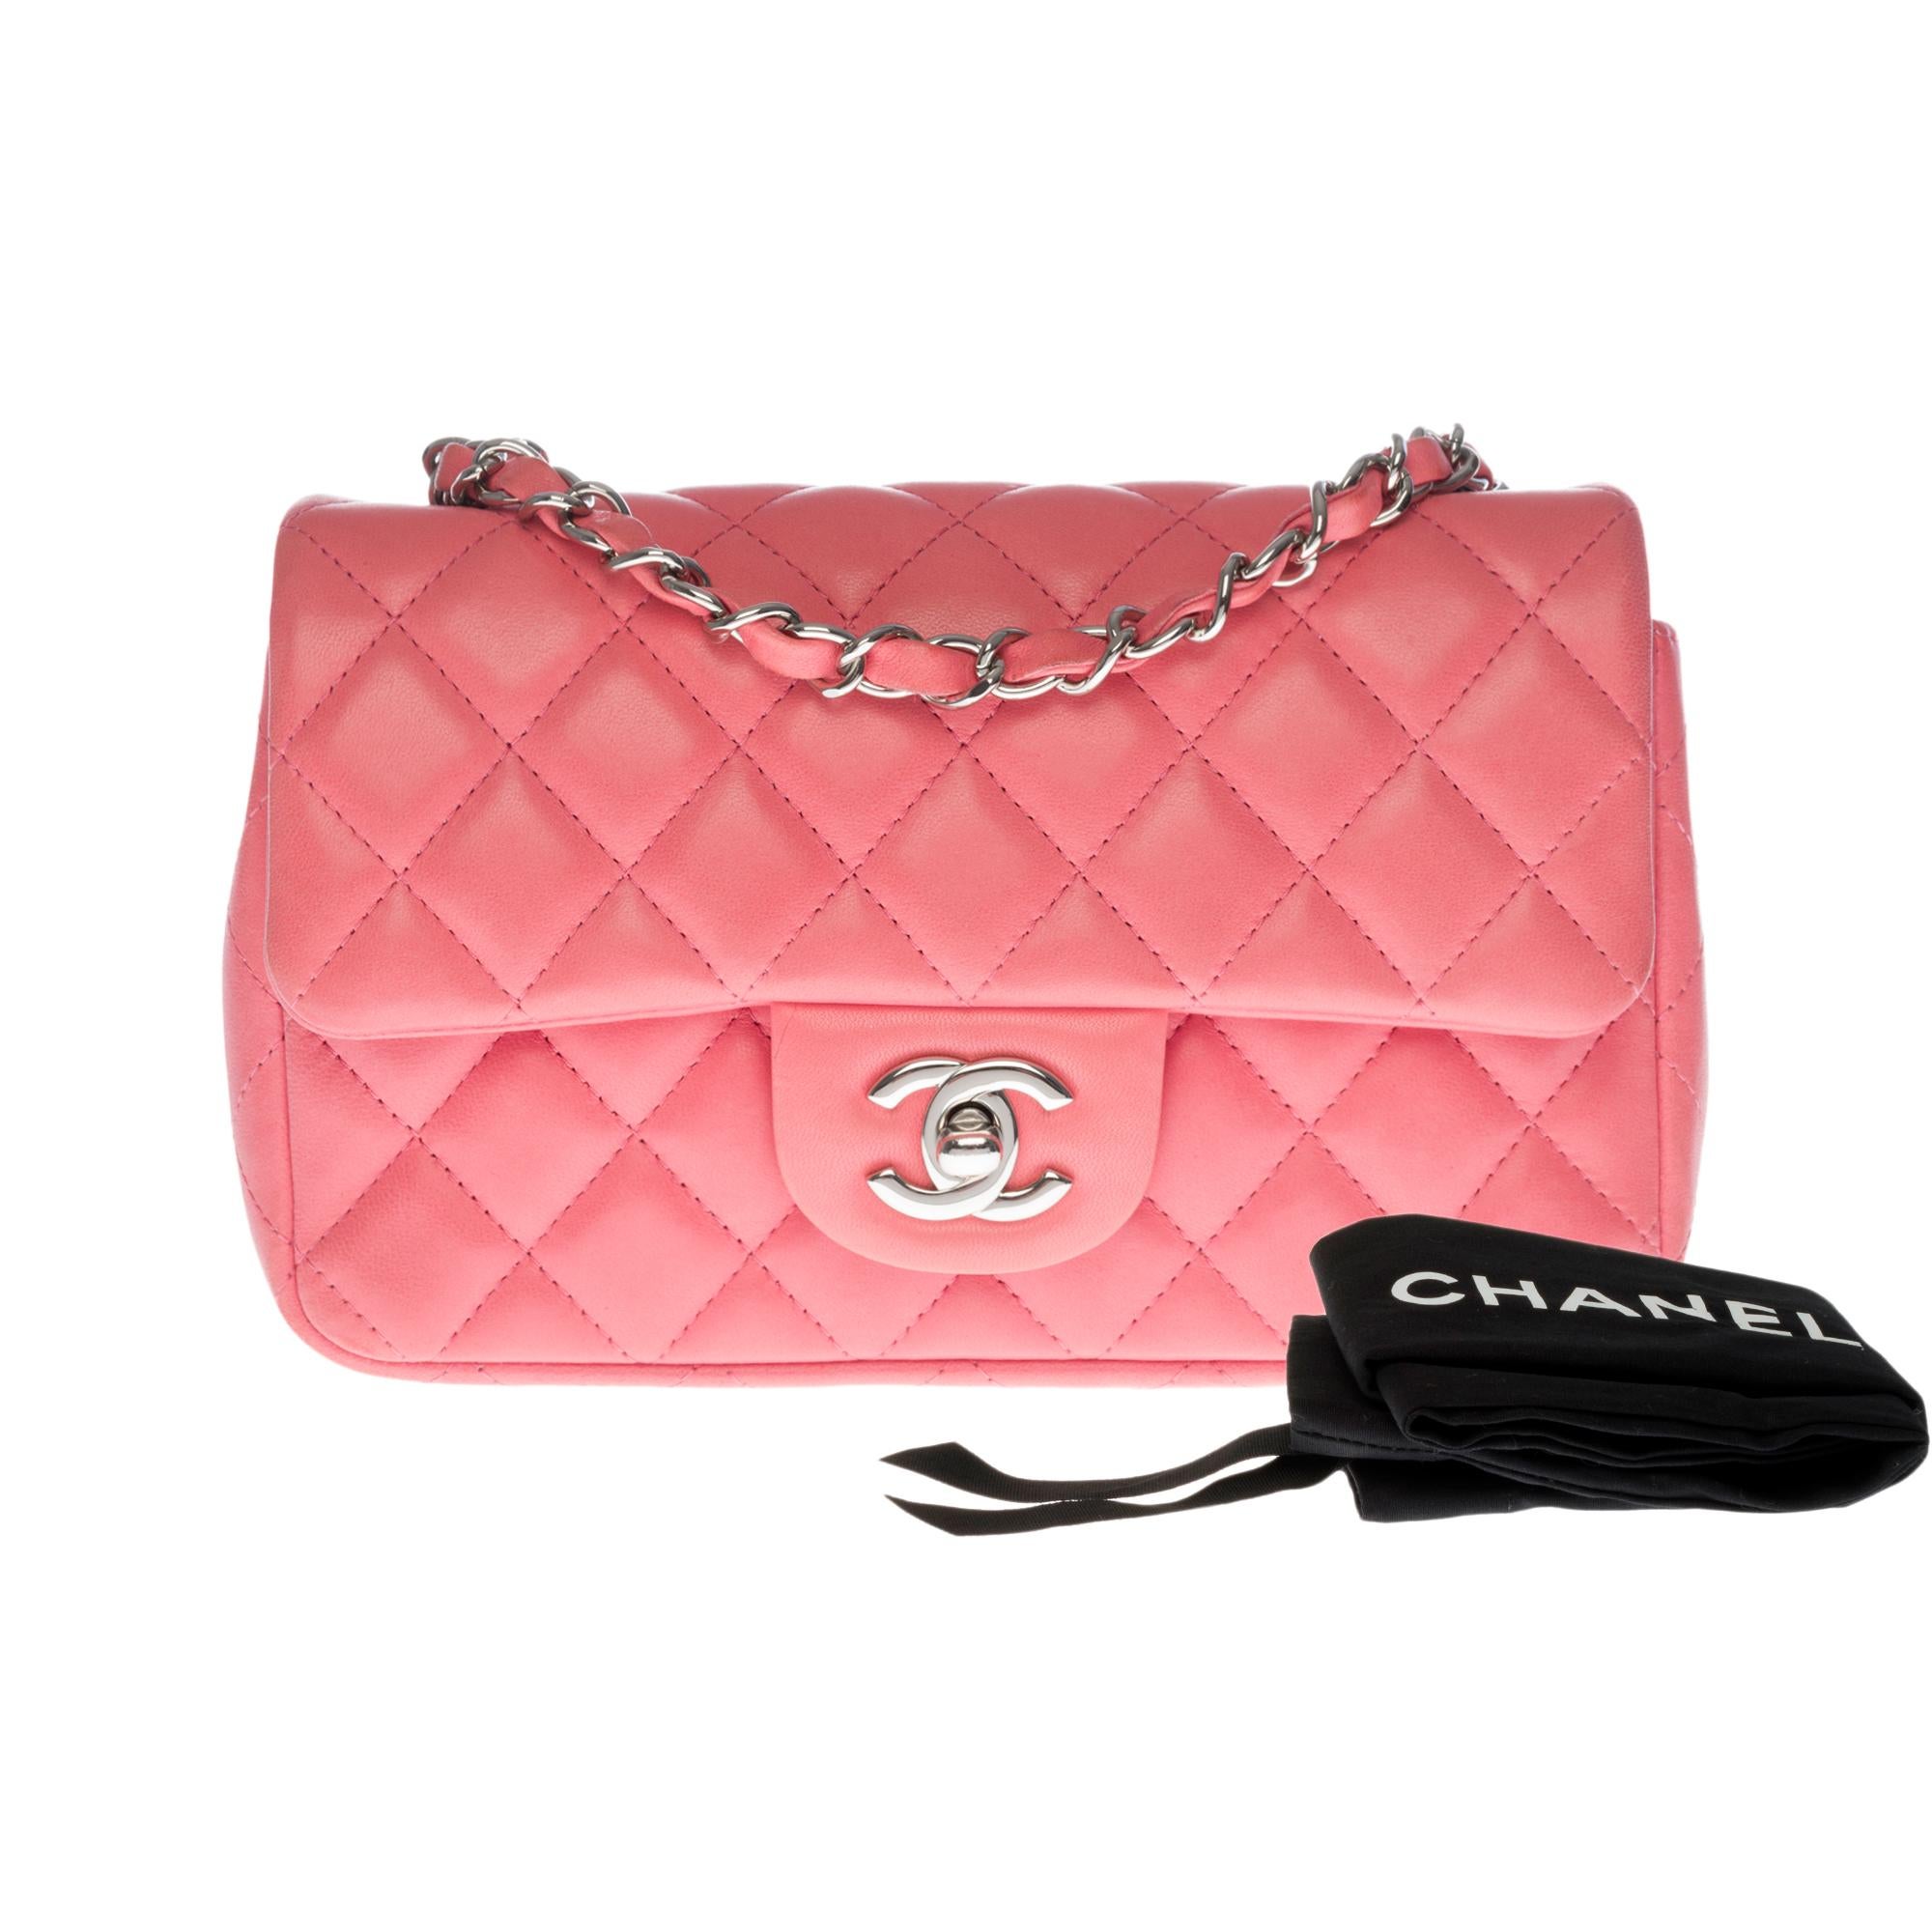 Chanel Mini Timeless Shoulder bag in Pink quilted leather and silver hardware 5